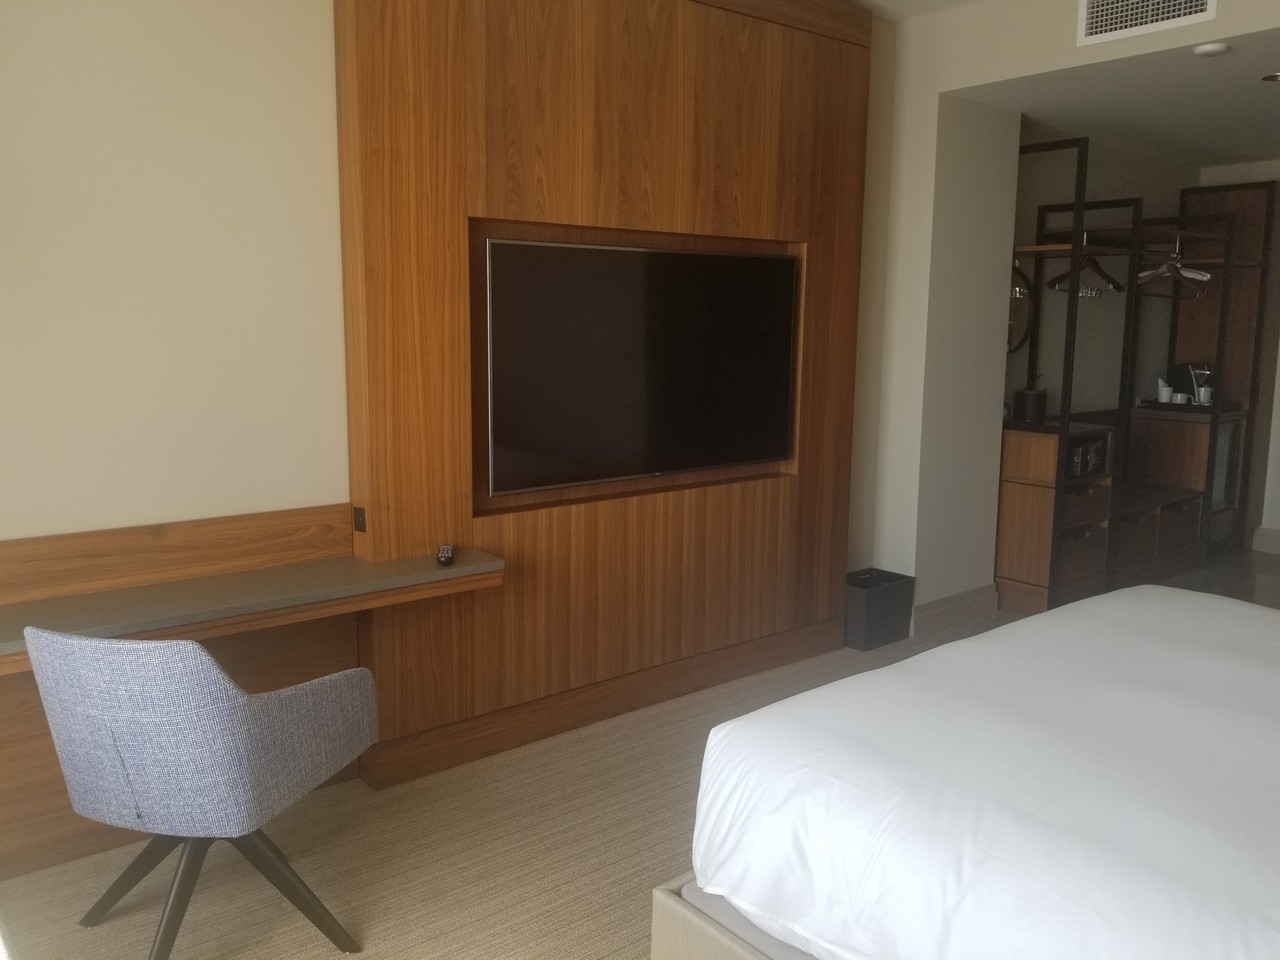 a room with a tv on the wall